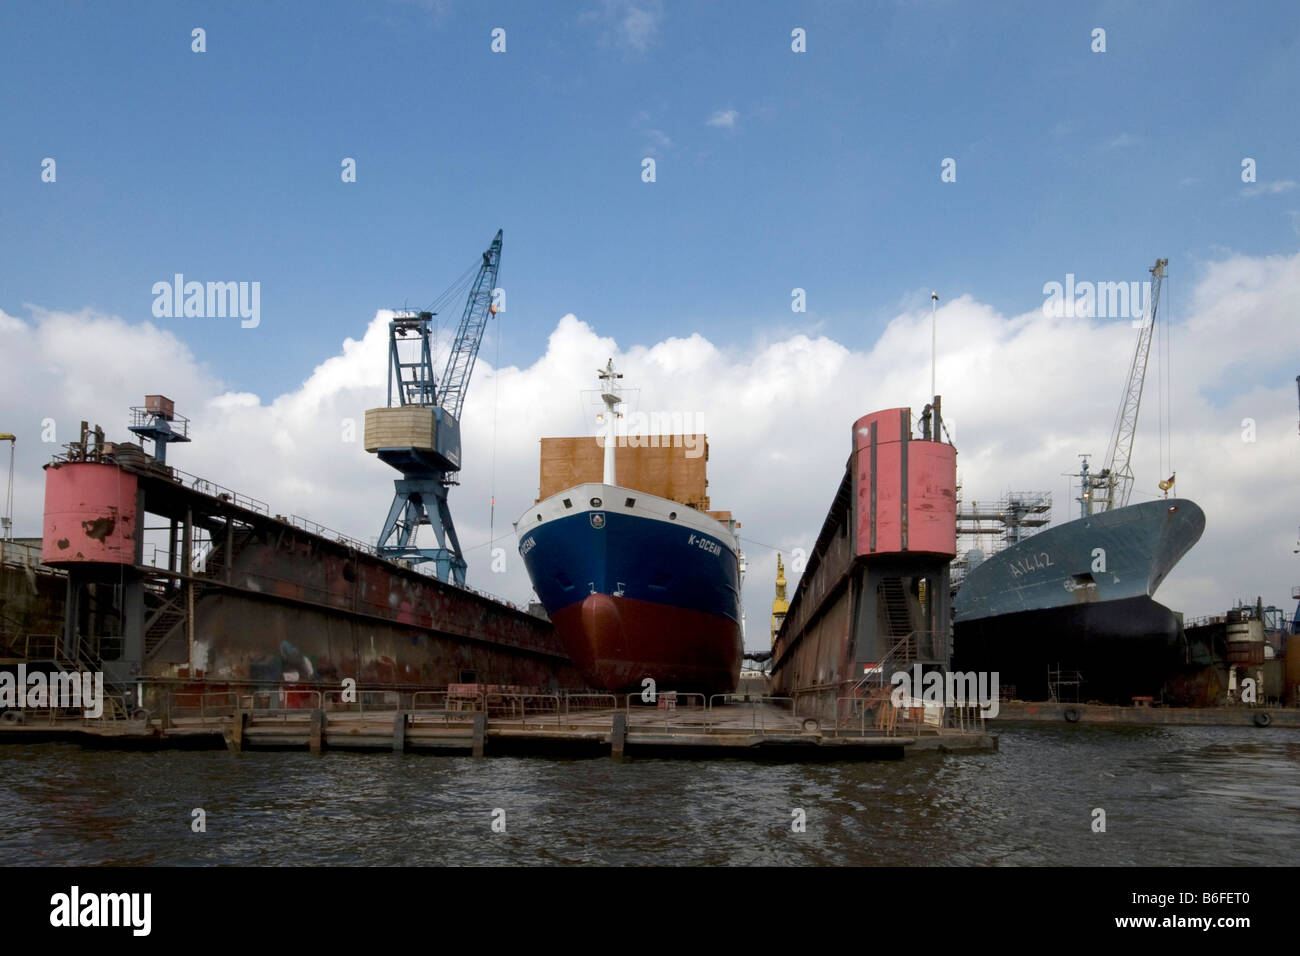 Harbour with floating docks to repair ships, Hamburg, Germany, Europe Stock Photo